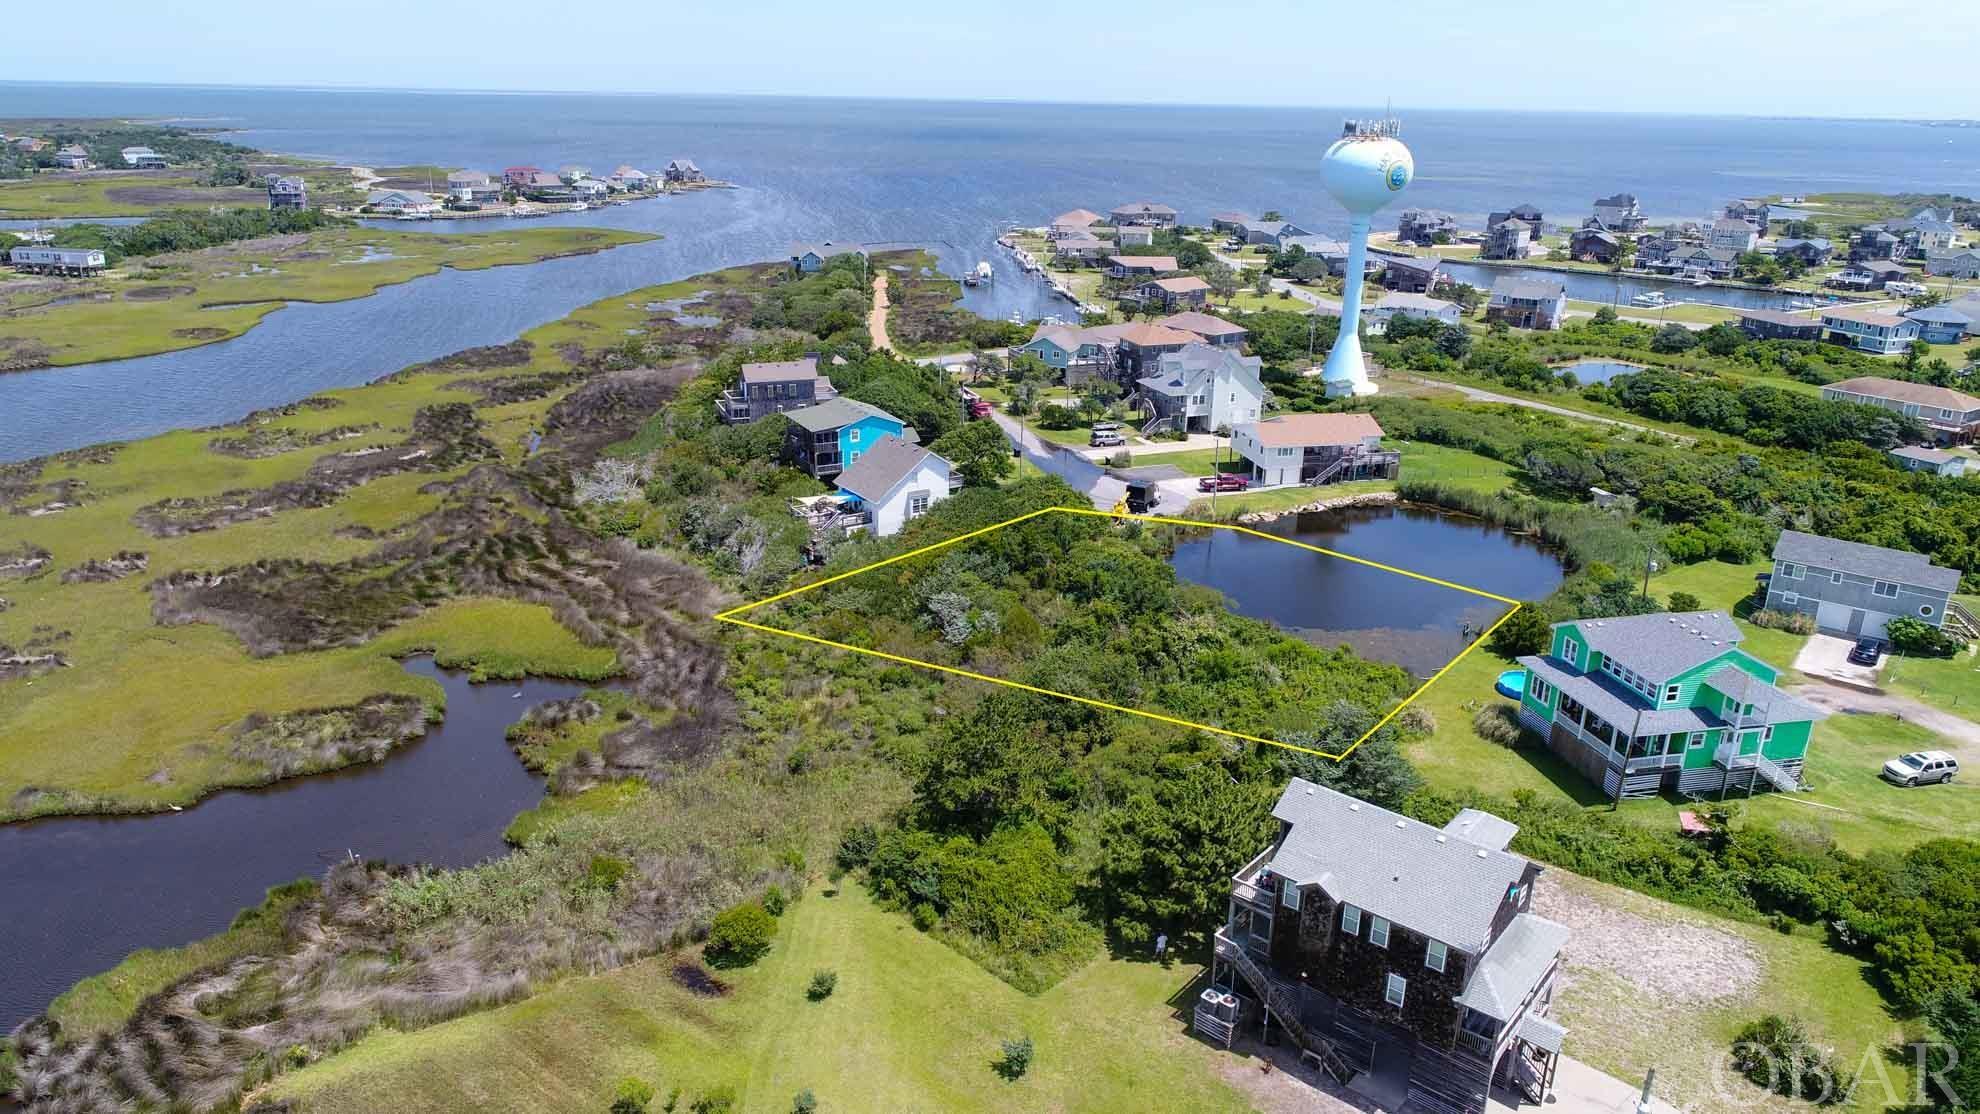 Great opportunity to secure a building lot in Hatteras Estates with ocean access and HOA boat dockage subject to availability. 2 BR septic permit in hand ready to build with complete set of engineered house plans for a 2 story 1152sqft residence.